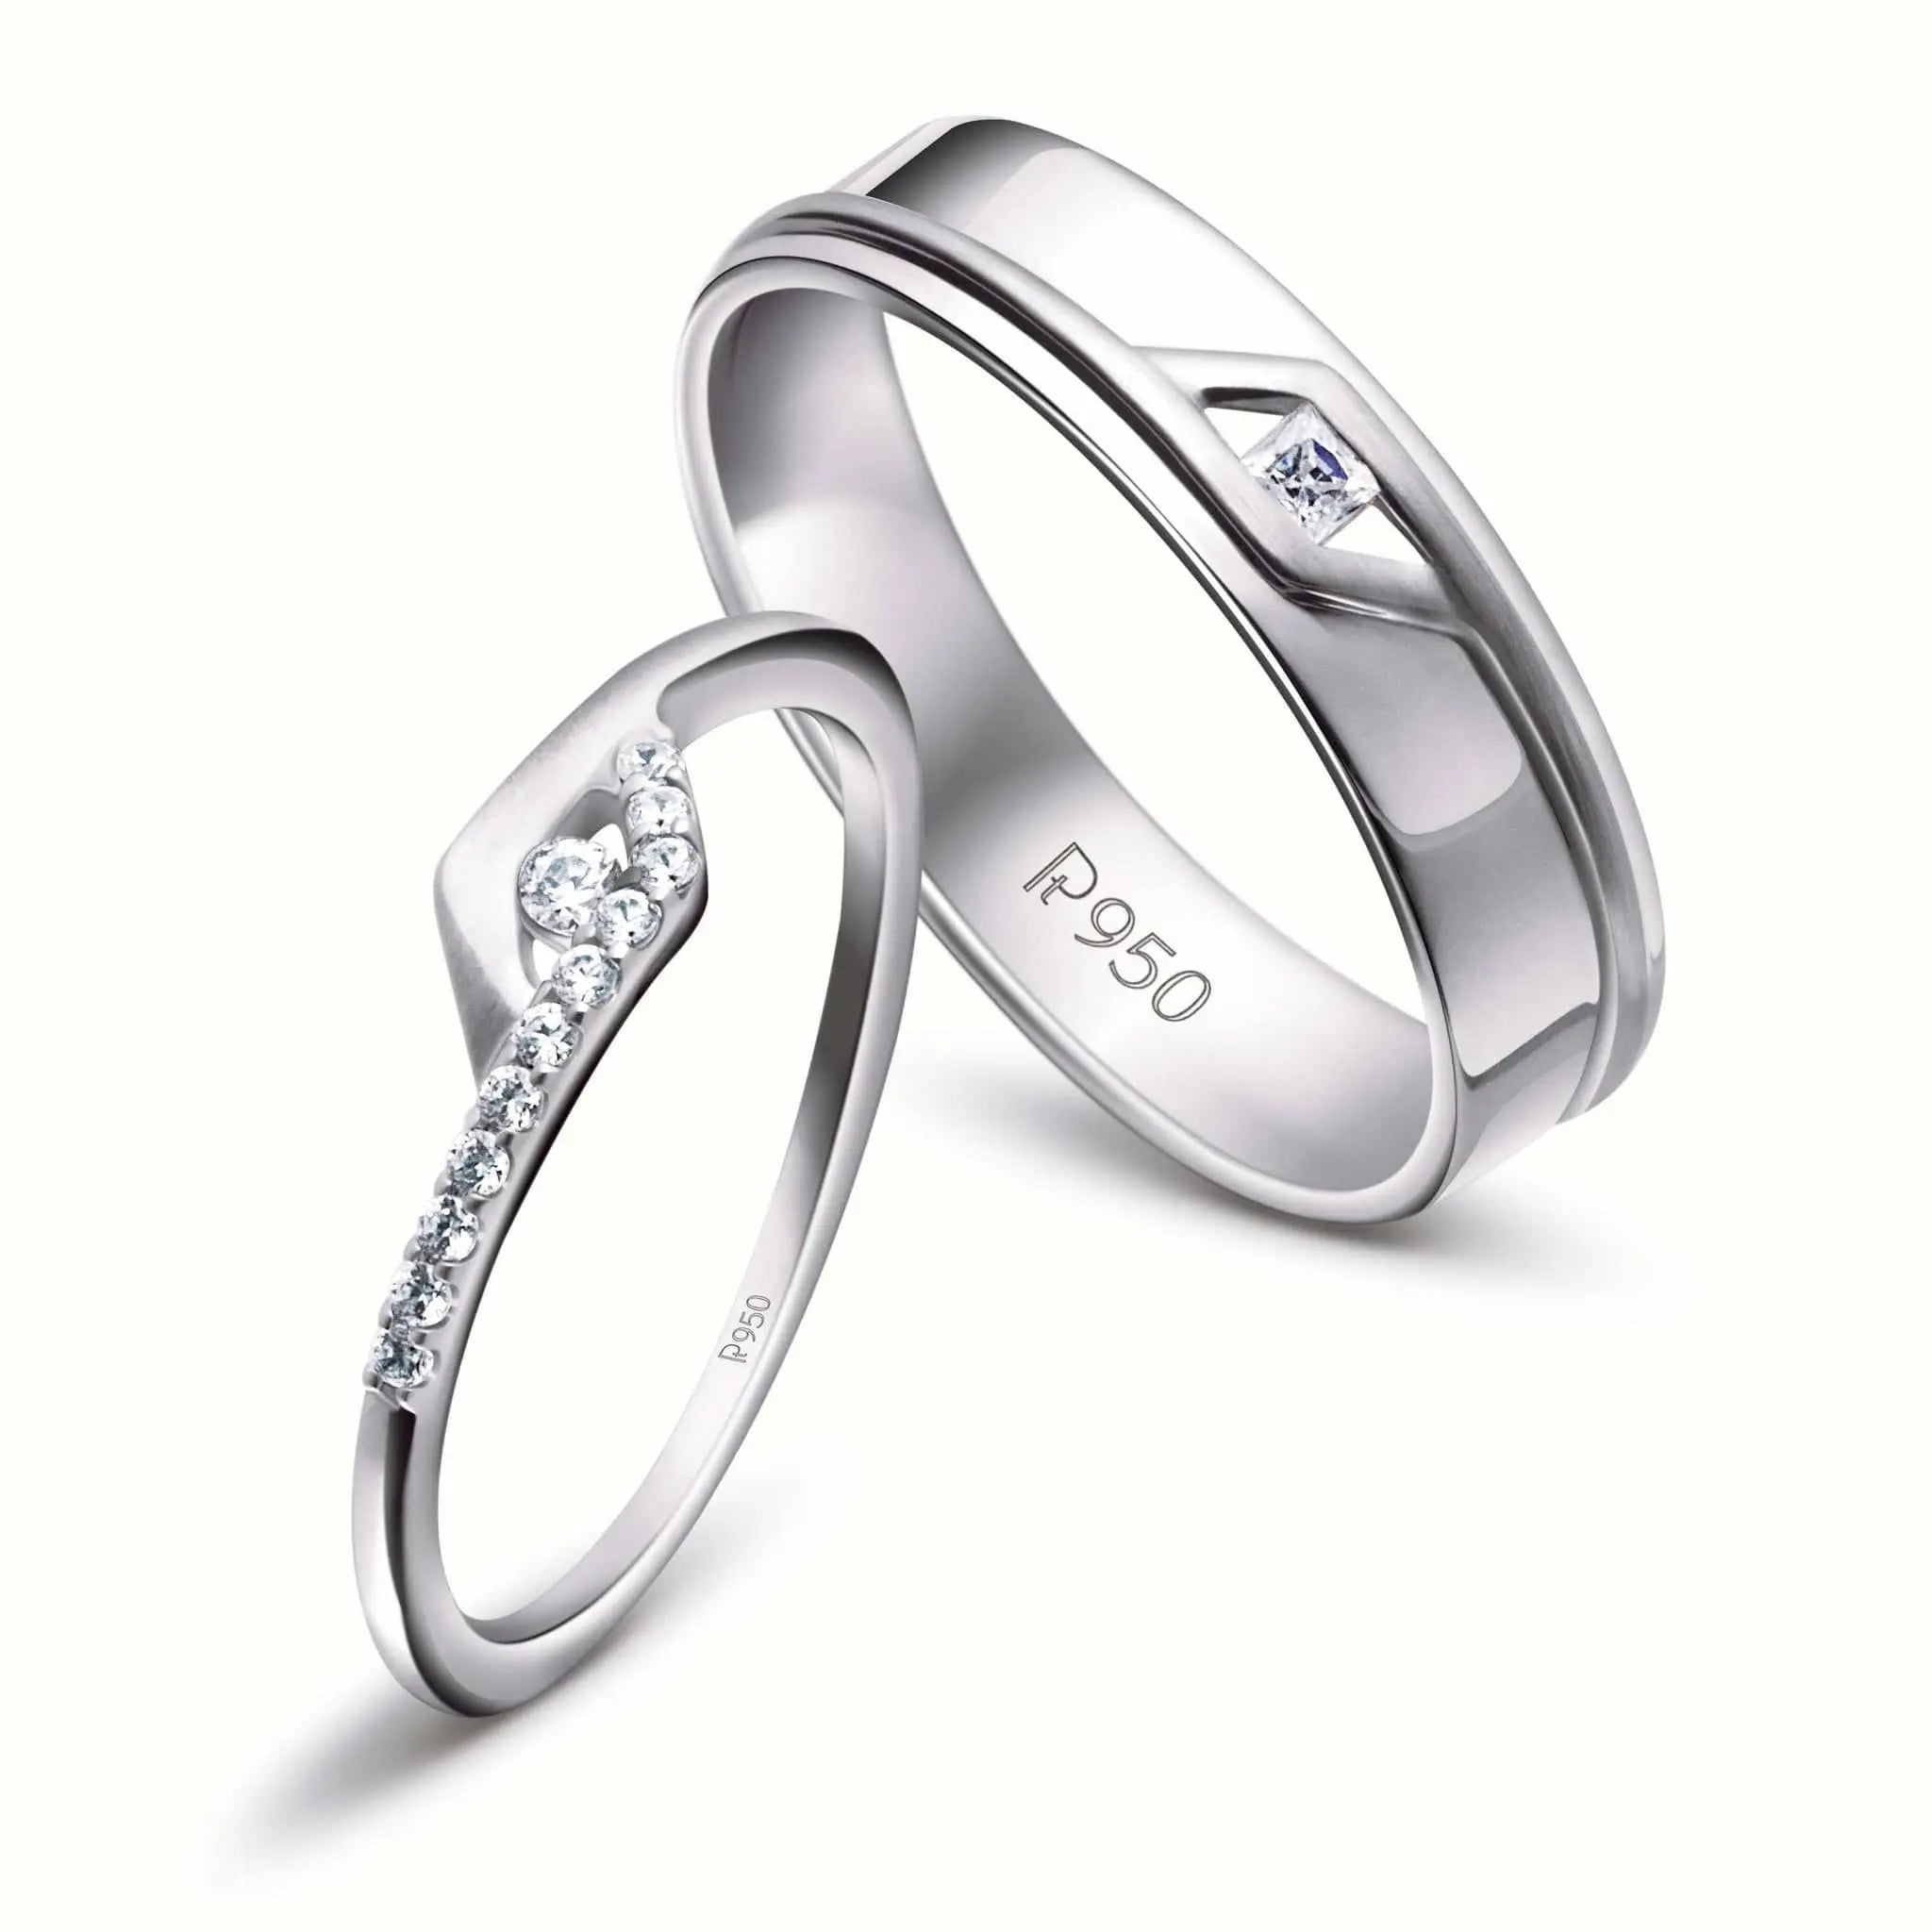 Matte 925 Silver Plated Platinum Couple Rings - Couple Rings